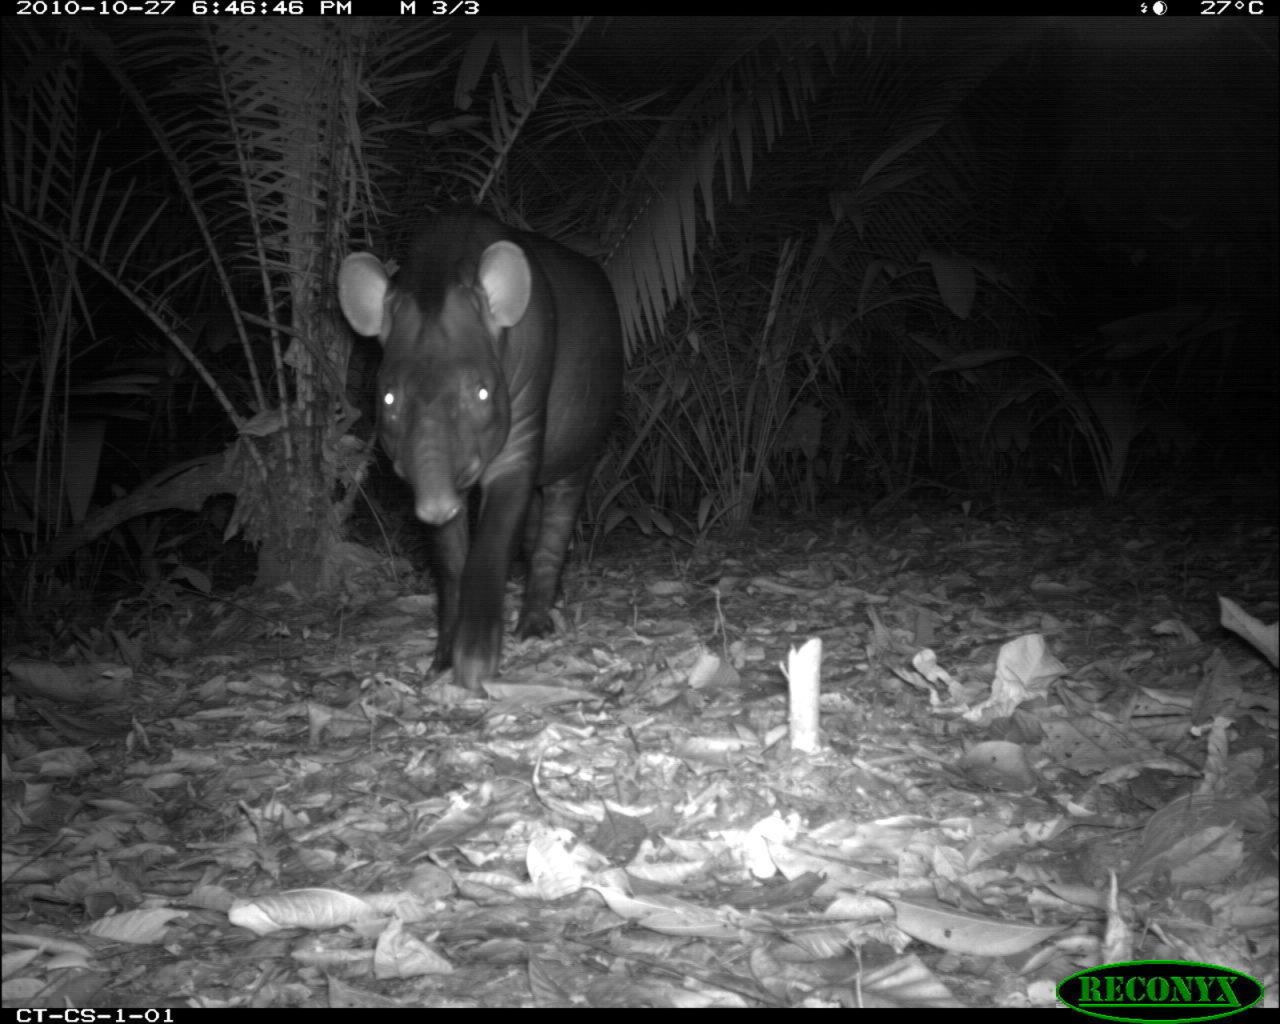 A Lowland Tapir at the Central Suriname Nature Reserve, Suriname. Wildlife Insights is currently in beta, and there are plans for more features to be added in future.